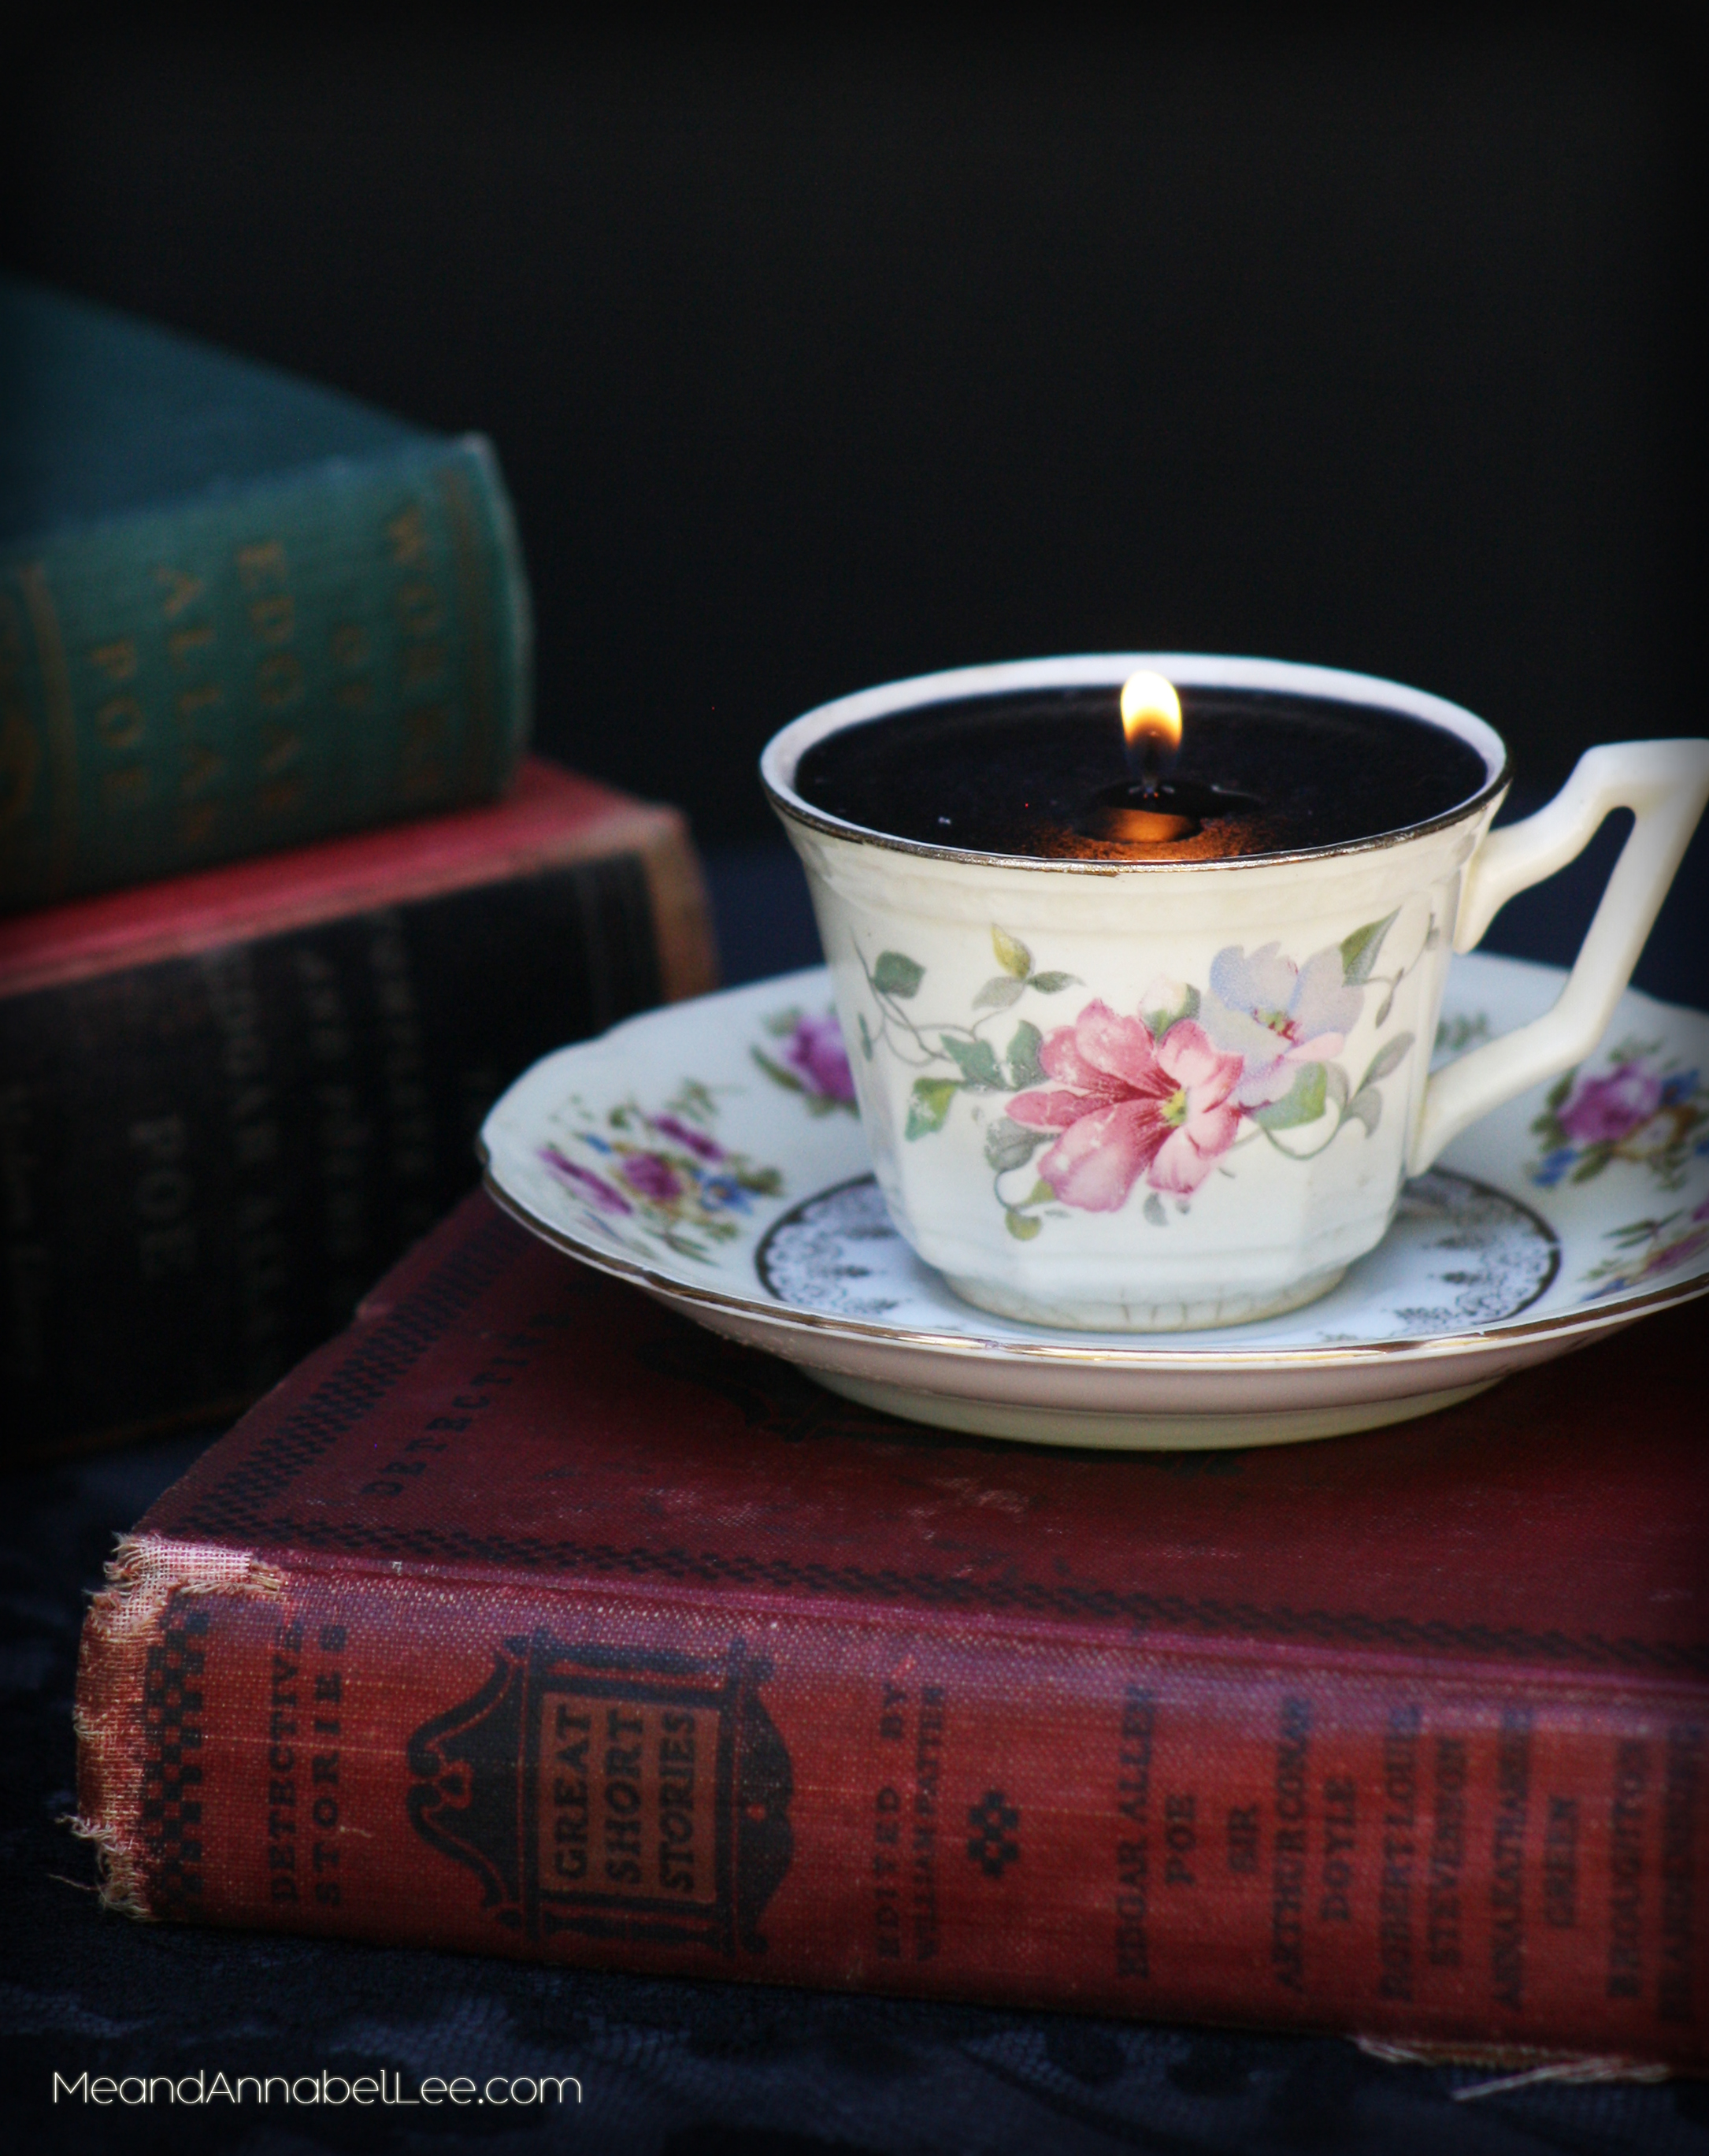 DIY Victorian Gothic Black Tea Cup Candles - Goth It Yourself Candlemaking - How to Make Candles - Vintage Tea Cup Trash to Treasure - Alice in Wonderland Tea Party - www.MeandAnnabelLee.com - - Blog for all things Dark, Gothic, Victorian, & Weird